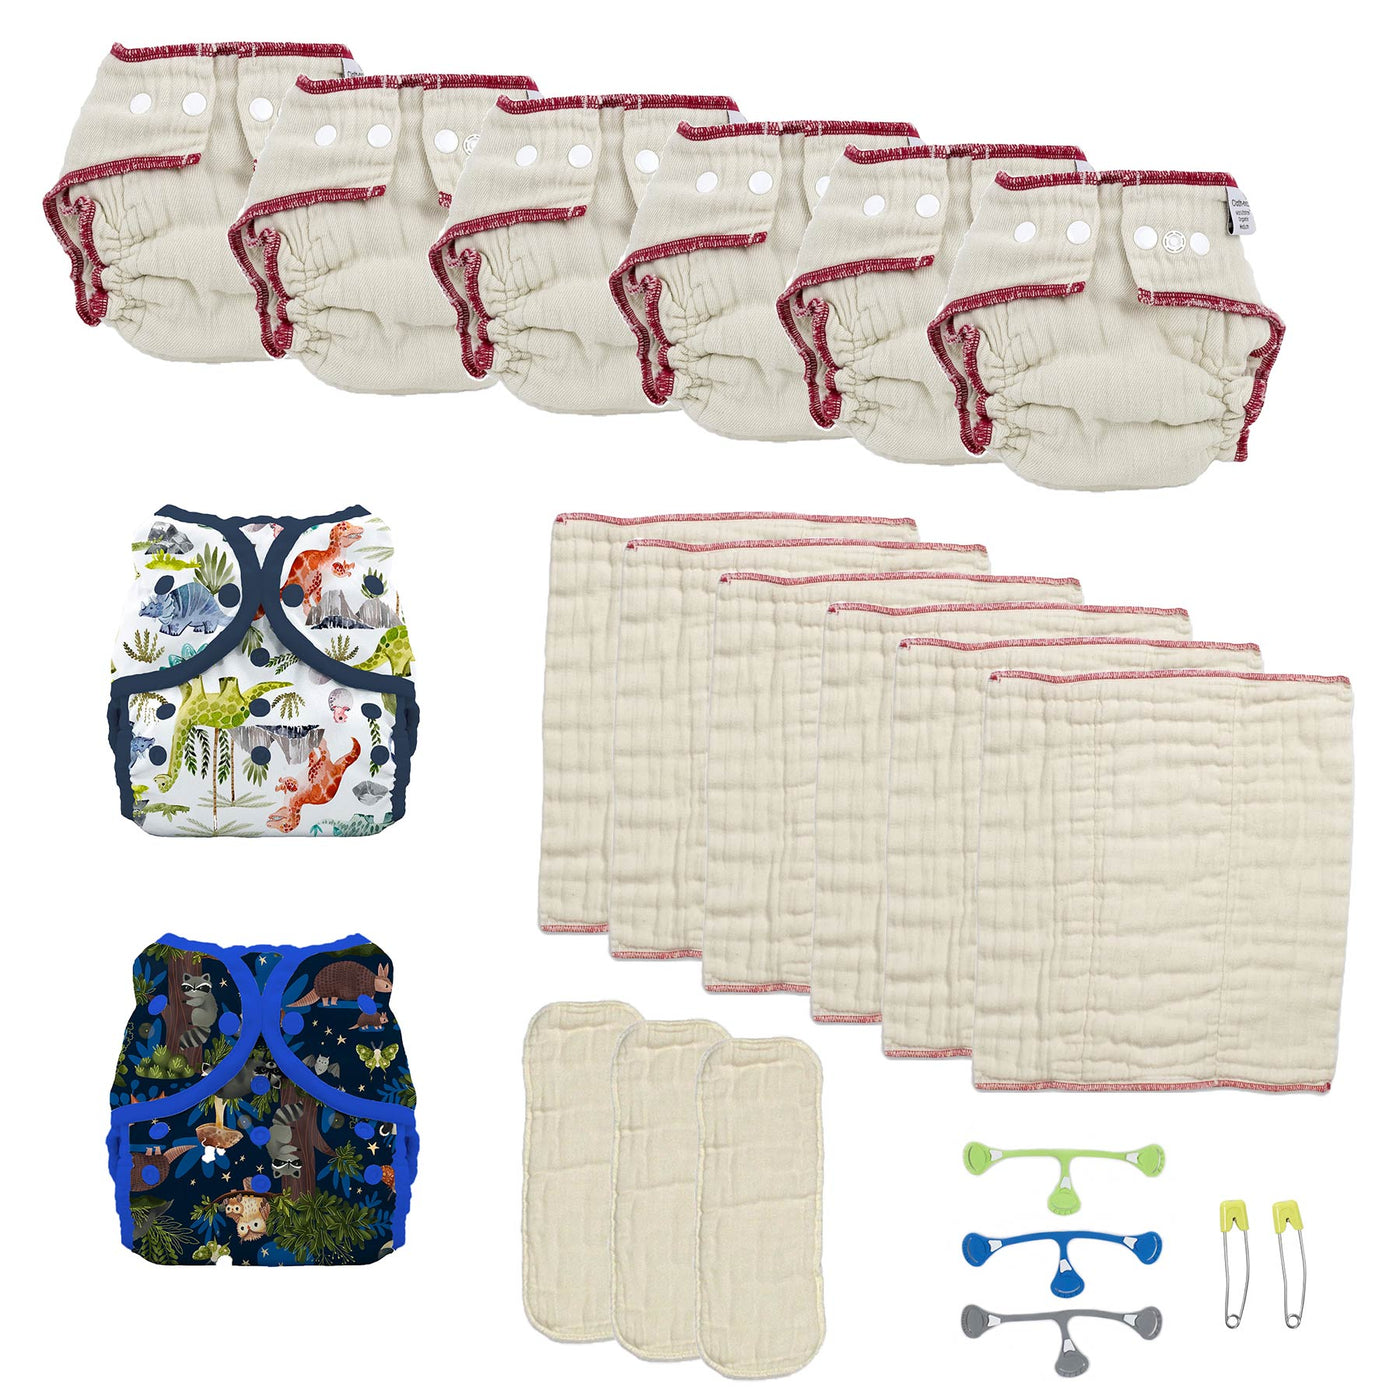 cloth diaper variety kit with dinosaurs